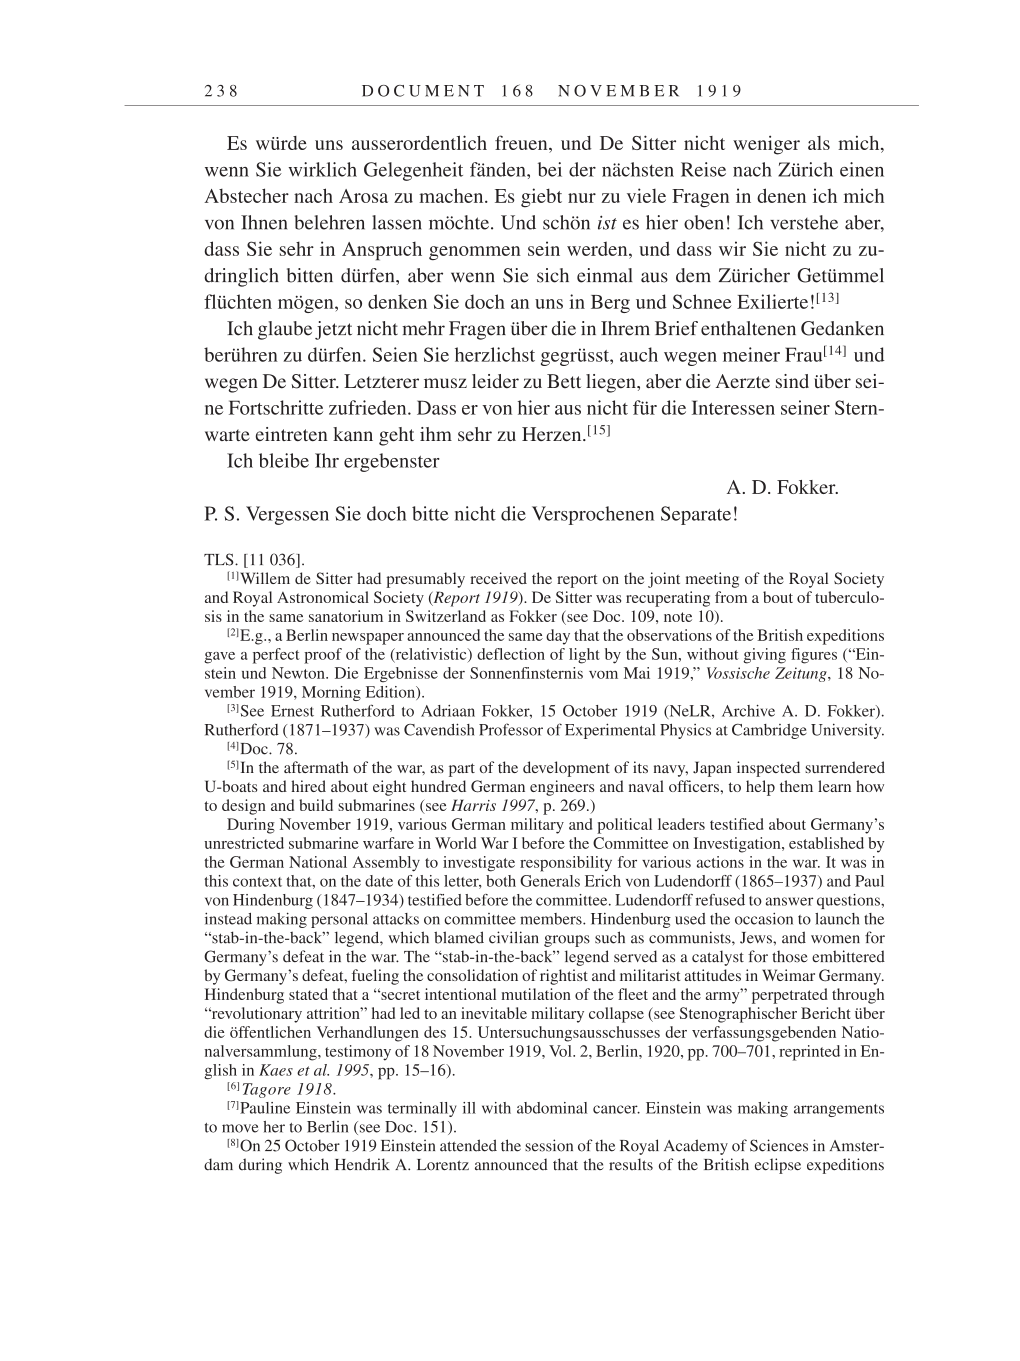 Volume 9: The Berlin Years: Correspondence January 1919-April 1920 page 238